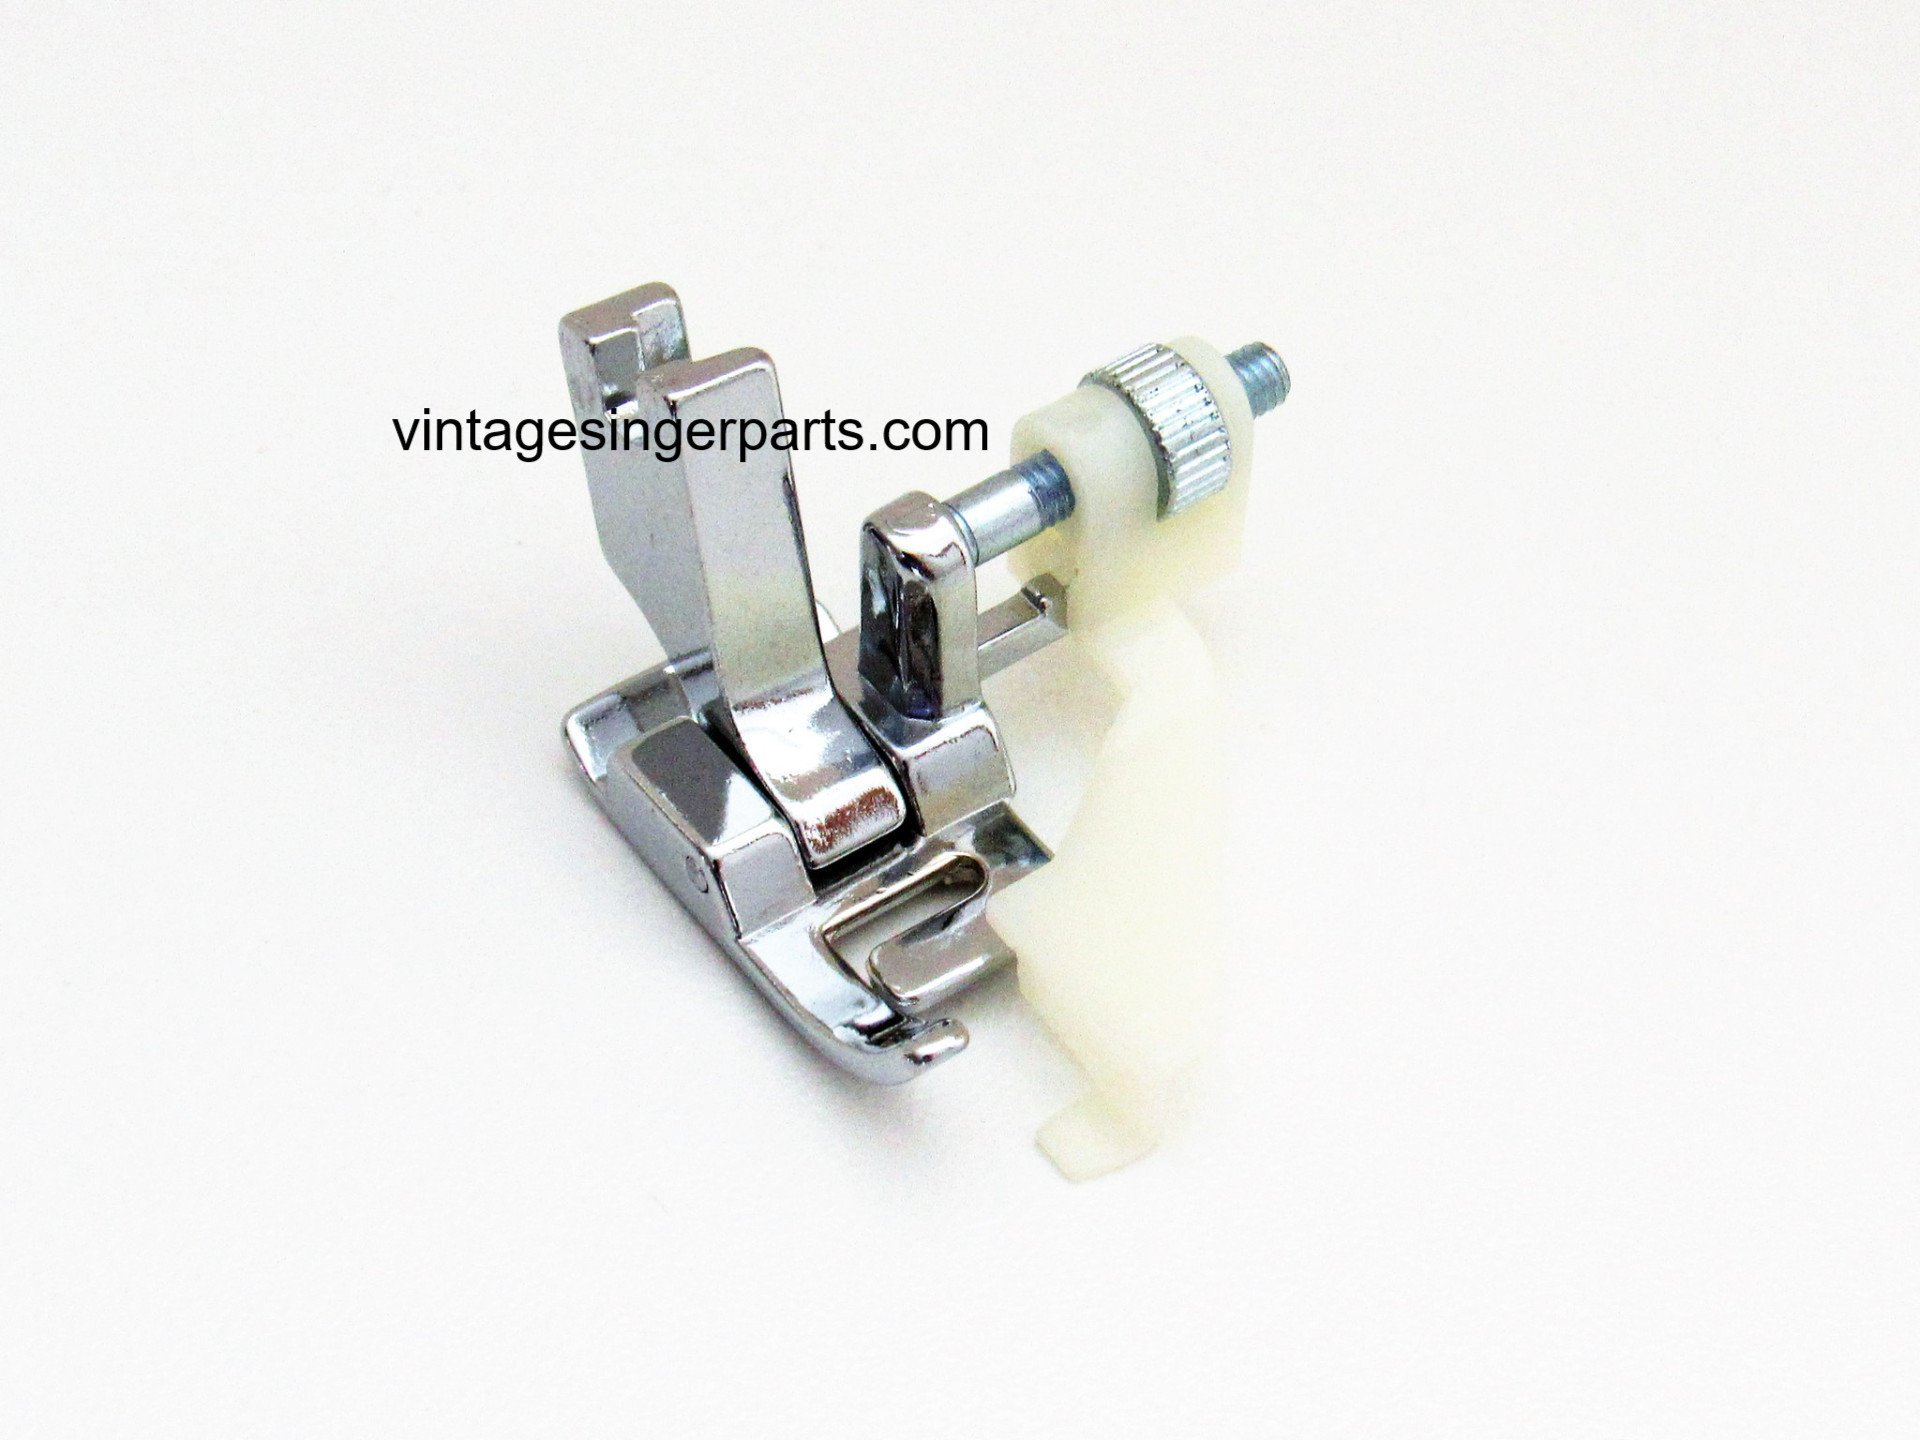 Singer 86649 Blind Stitch Attachment for Straight Low Shank Sewing Machines  